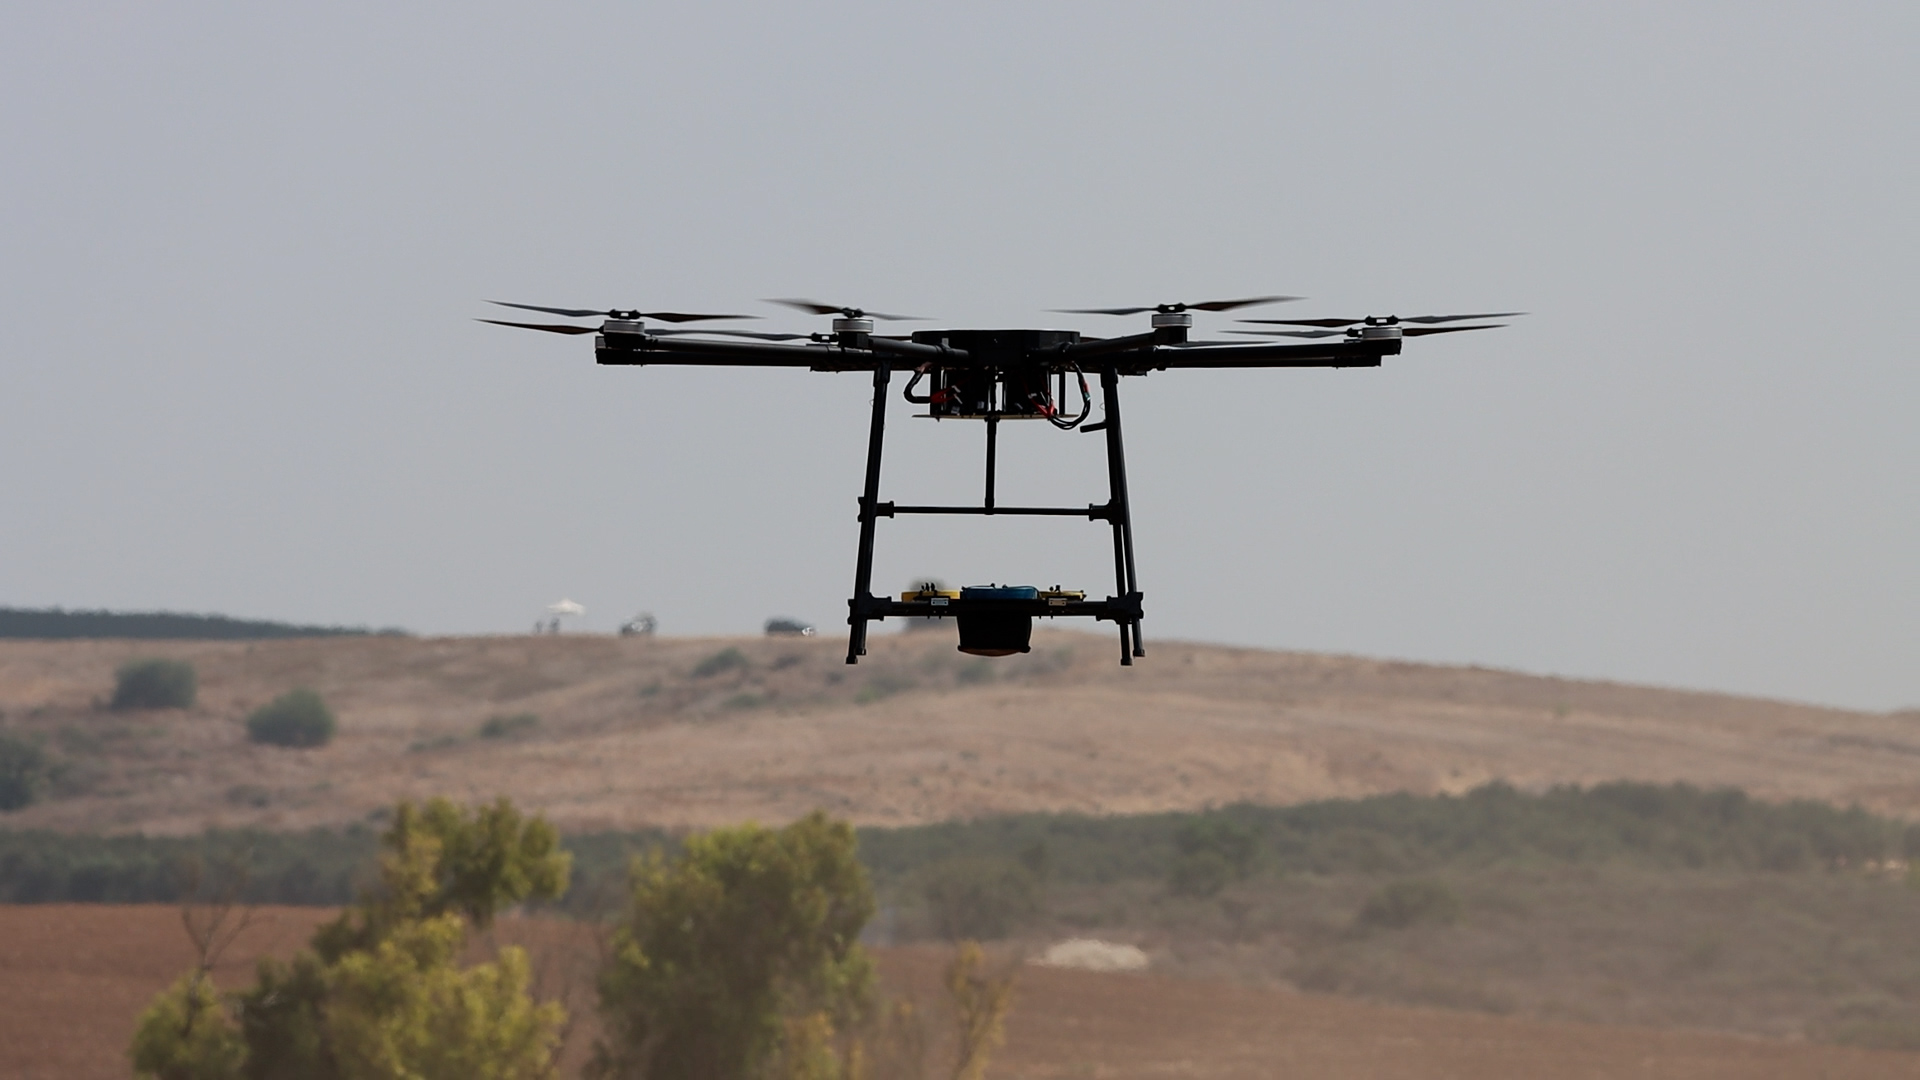 The company currently manufactures several drone platforms with heavy lift capabilities